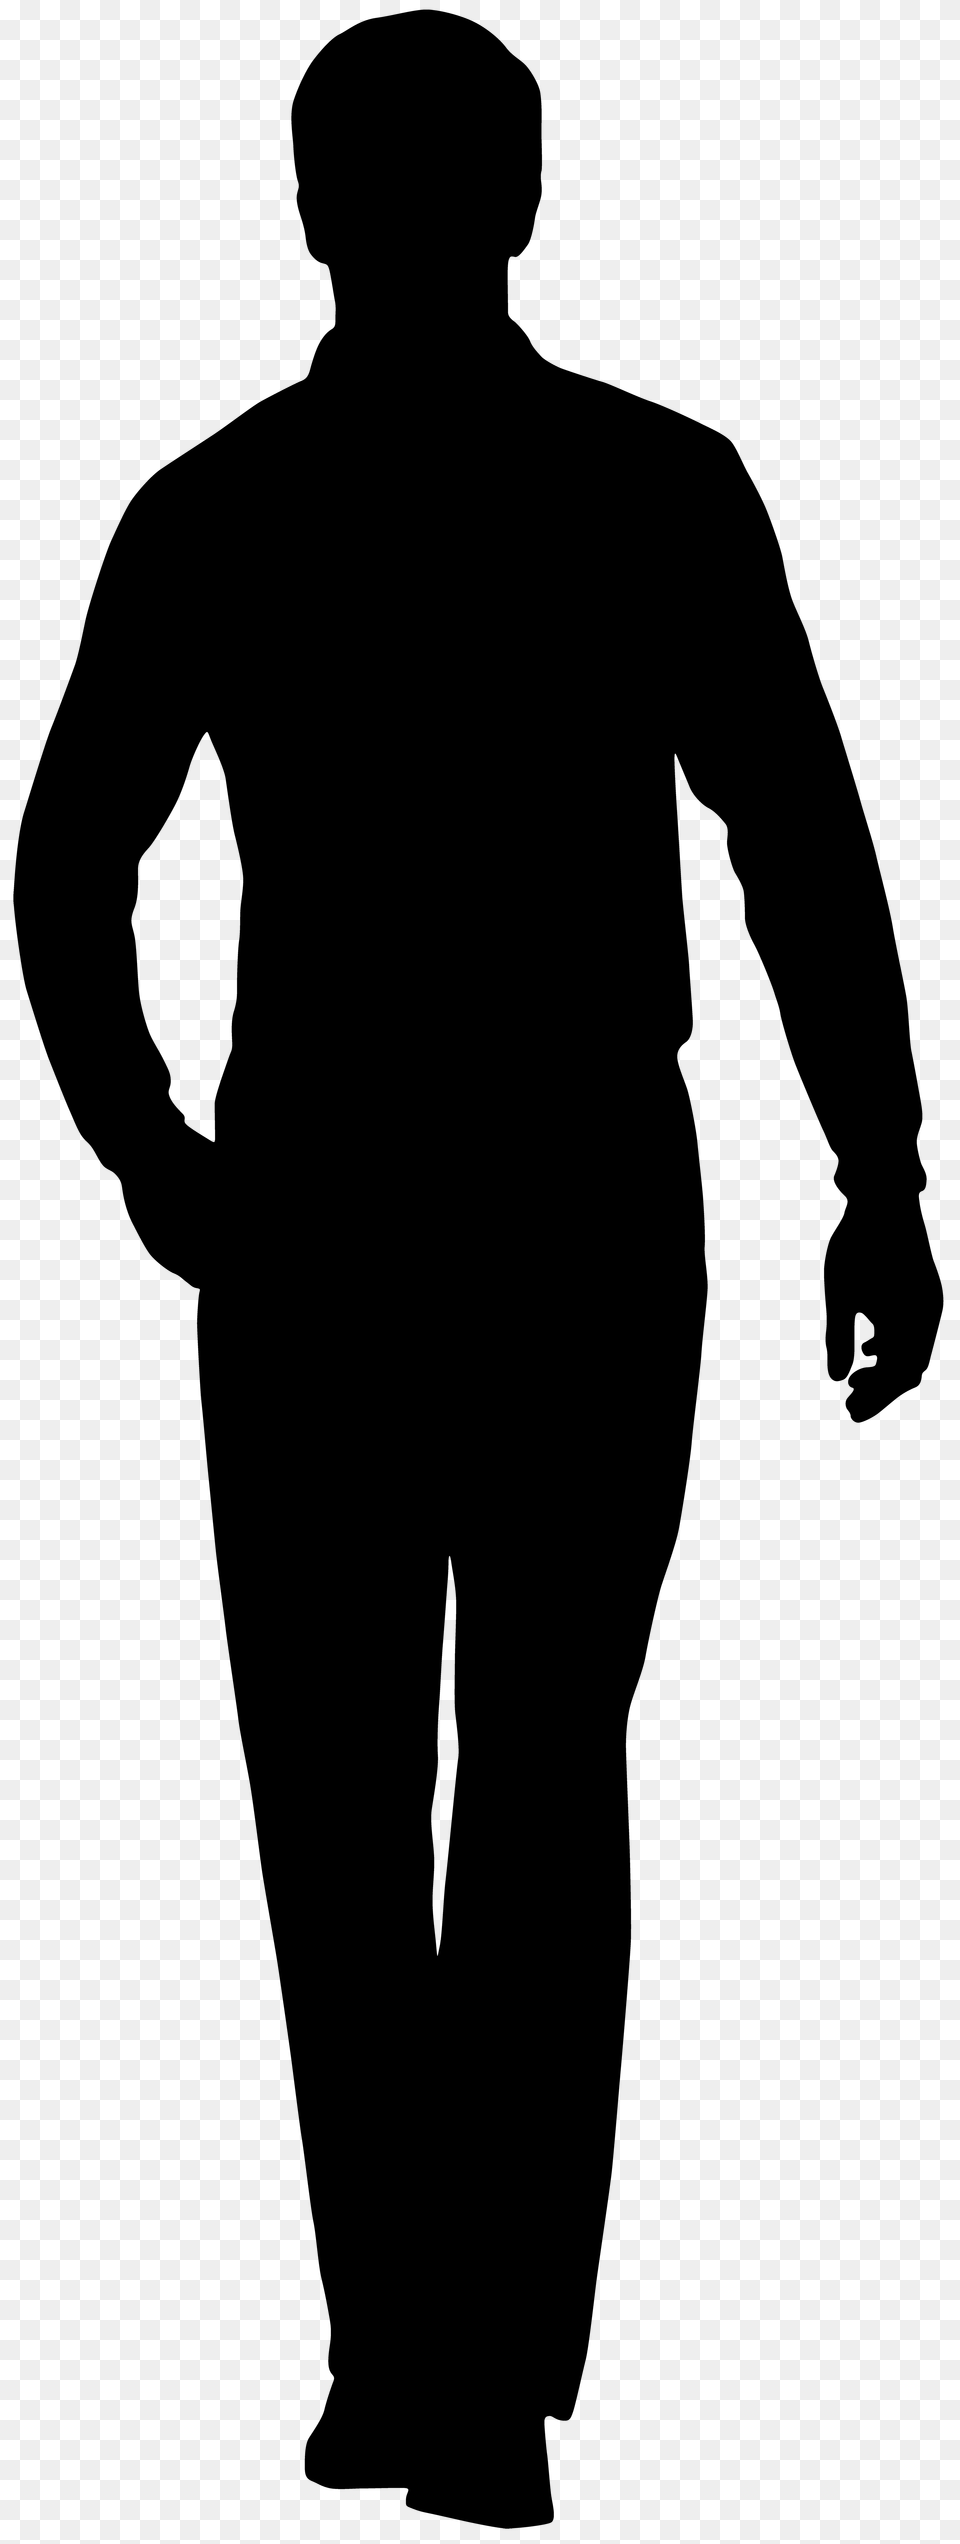 Male Silhouette Clip, Cross, Symbol Free Transparent Png